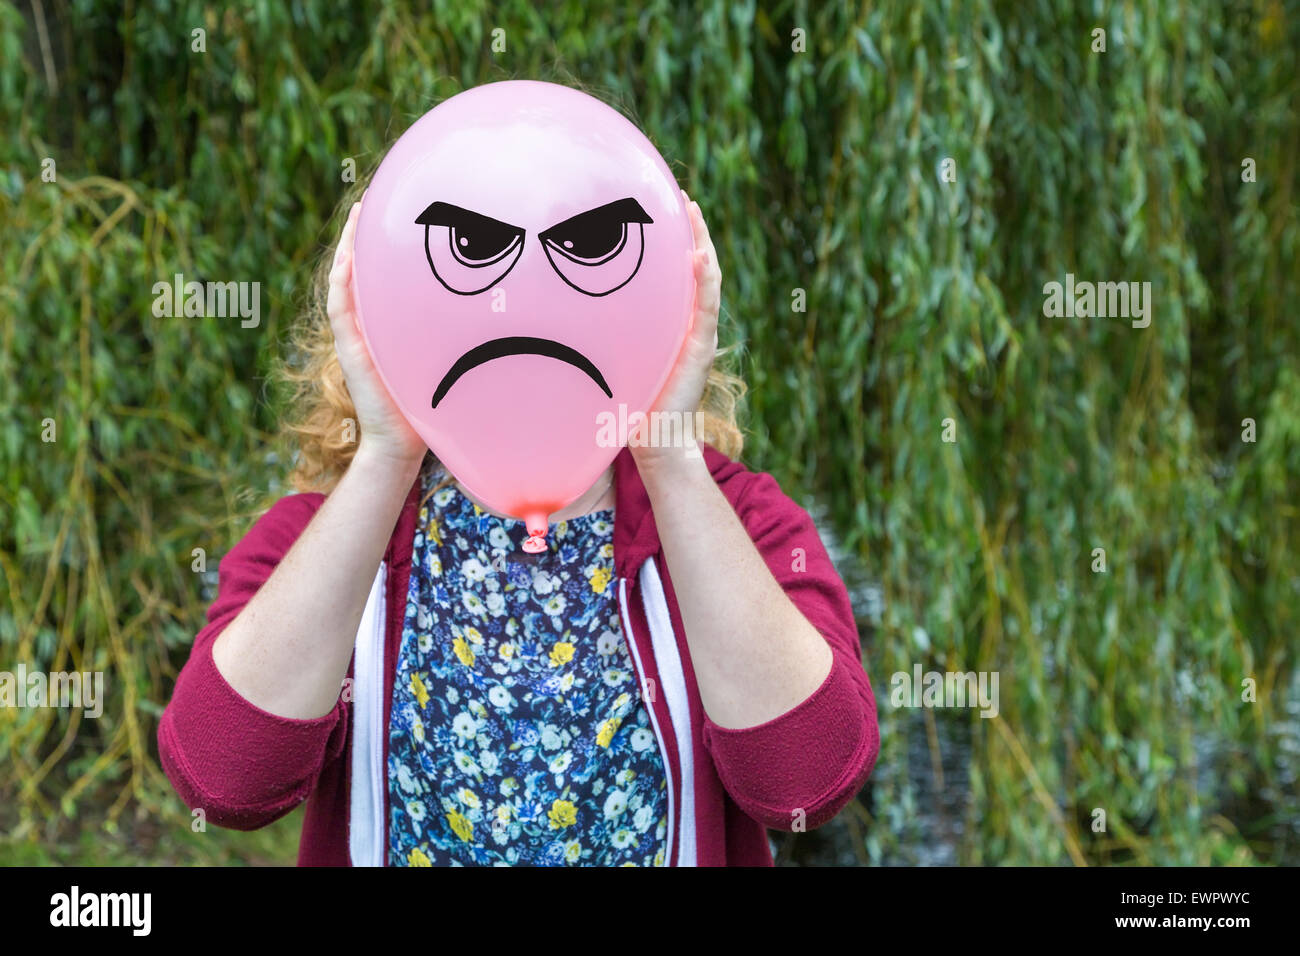 Teenage girl holding balloon with angry face as expression in nature Stock Photo